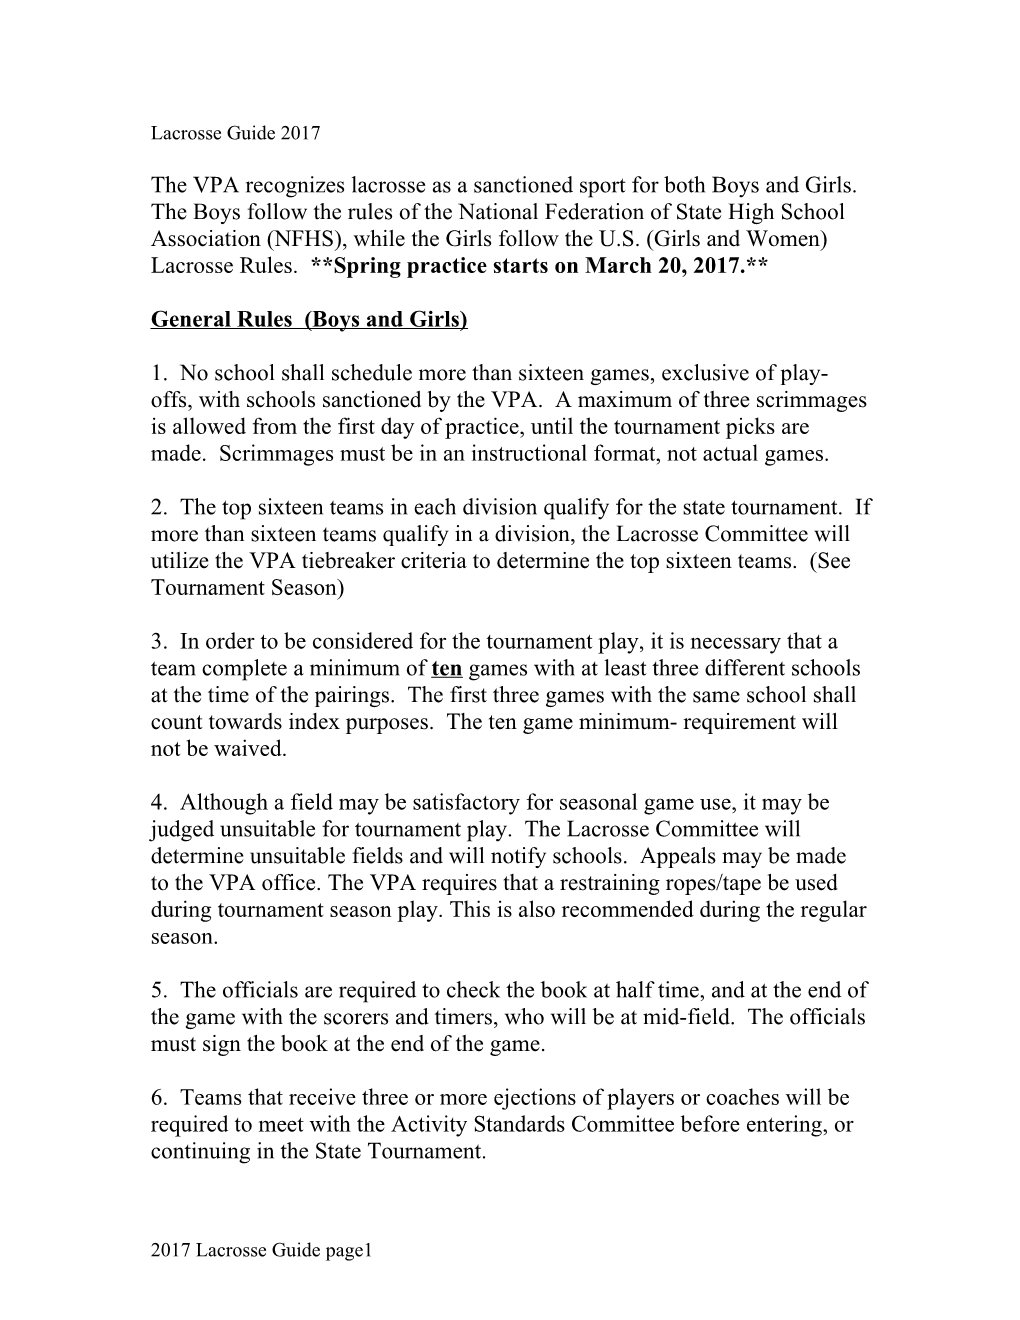 General Rules (Boys and Girls)